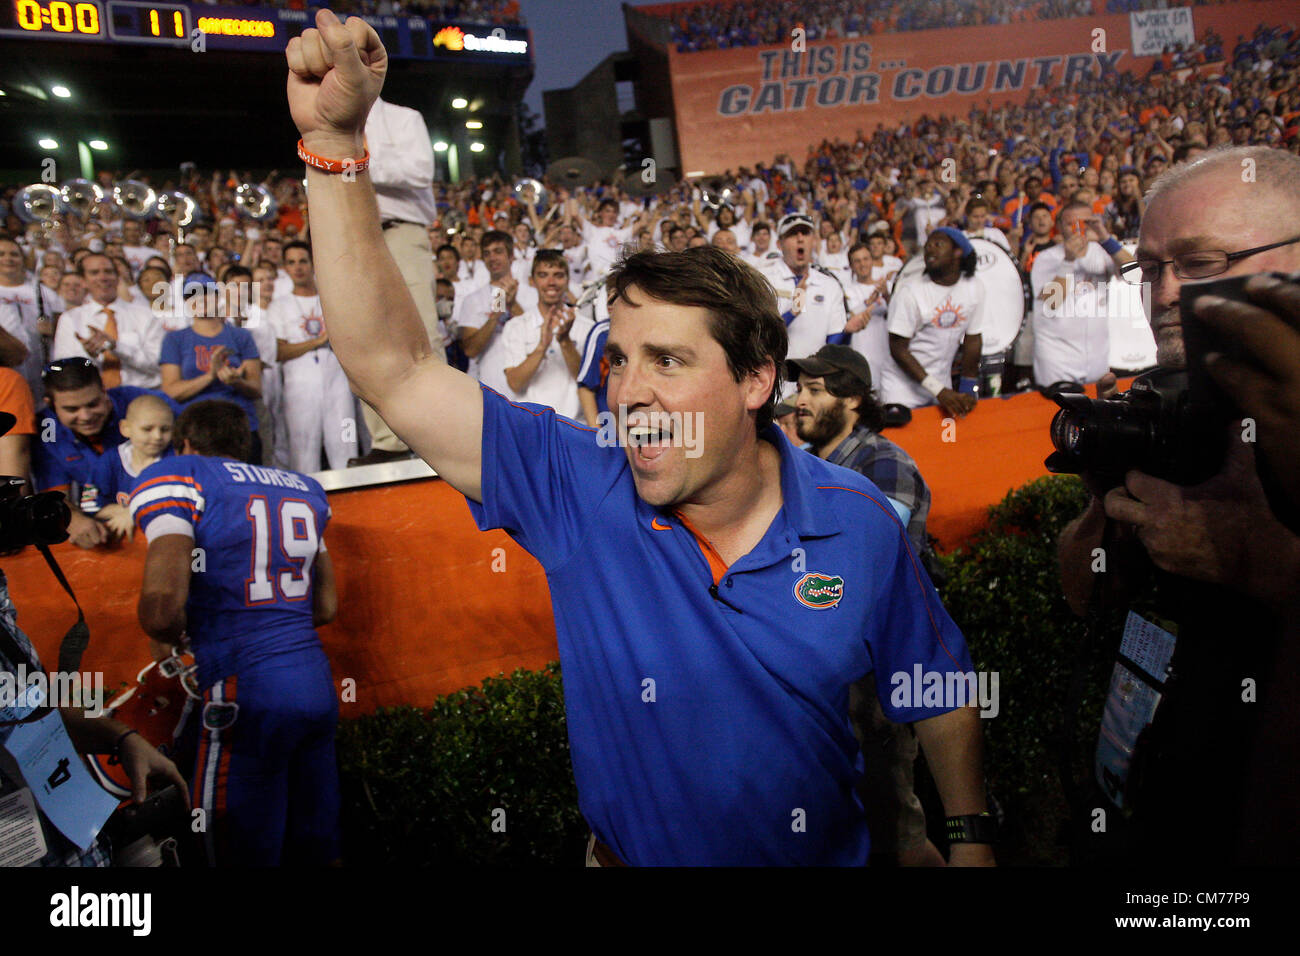 Oct. 20, 2012 - Florida, U.S. - WILL VRAGOVIC | Times.ot 360417 vrag gators 22 of (10/20/12 Gainesville, Fla.) Florida Gators head coach Will Muschamp after the South Carolina Gamecocks at the Florida Gators football game at Ben Hill Griffin Stadium in Gainesville, Fla. on Saturday, Oct. 20. The Gators defeated the Gamecocks 44-11. (Credit Image: © Will Vragovic/Tampa Bay Times/ZUMAPRESS.com) Stock Photo